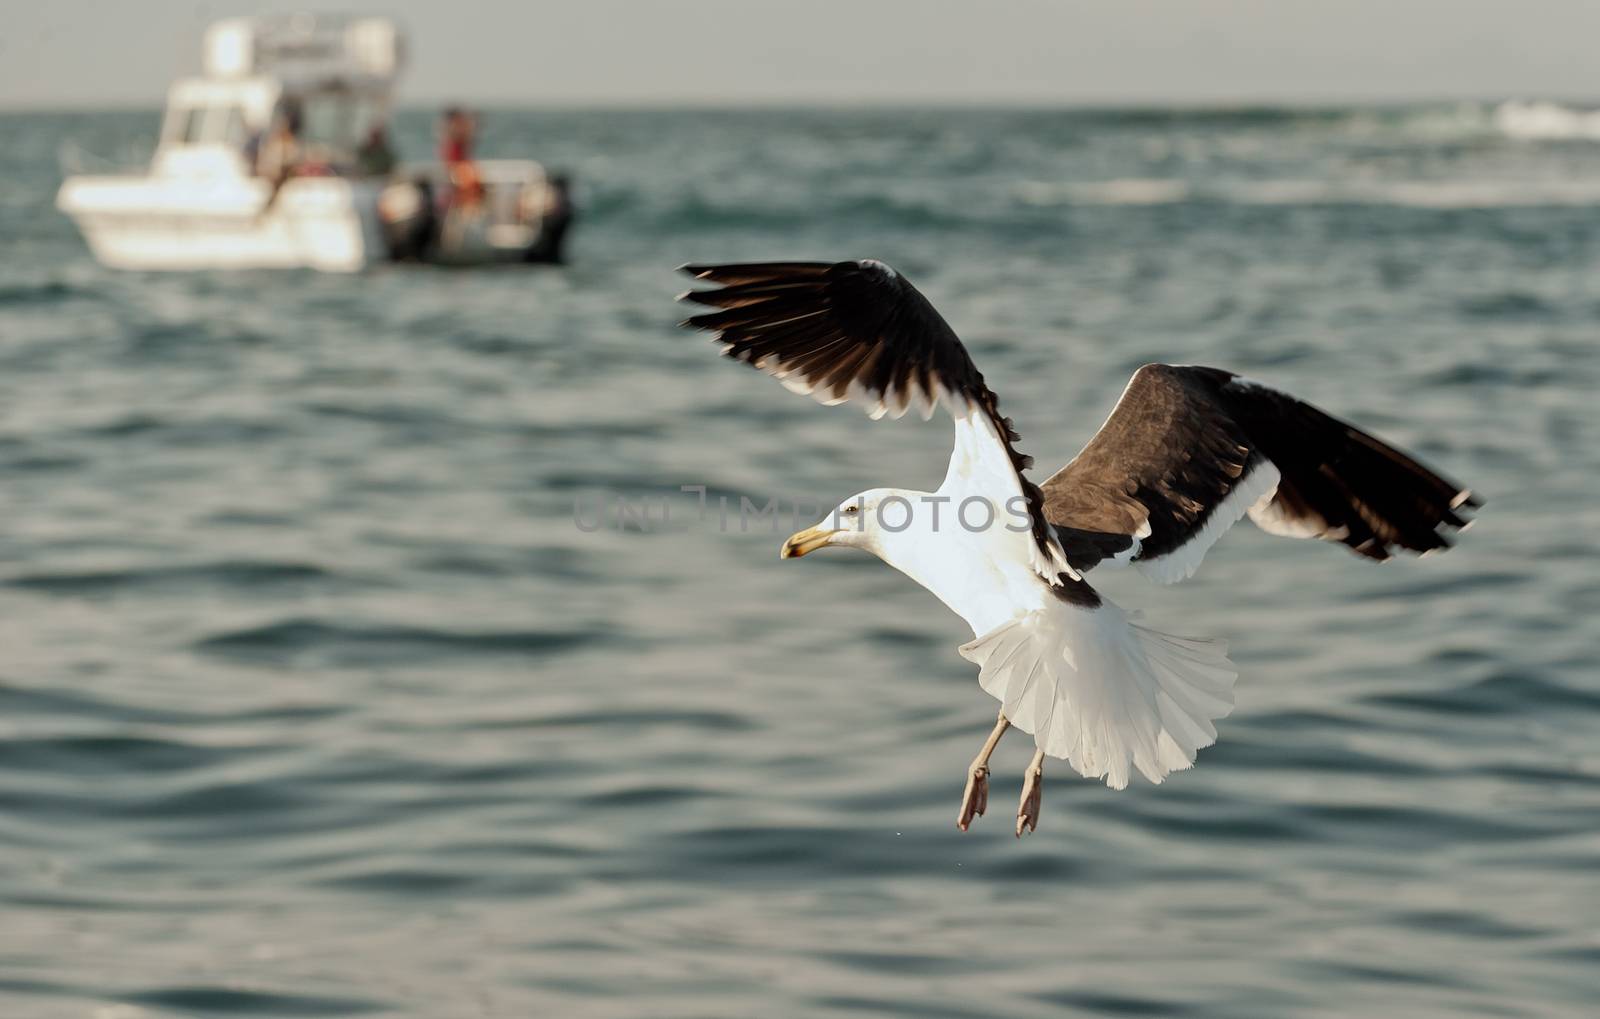 Flying Seagull  by SURZ